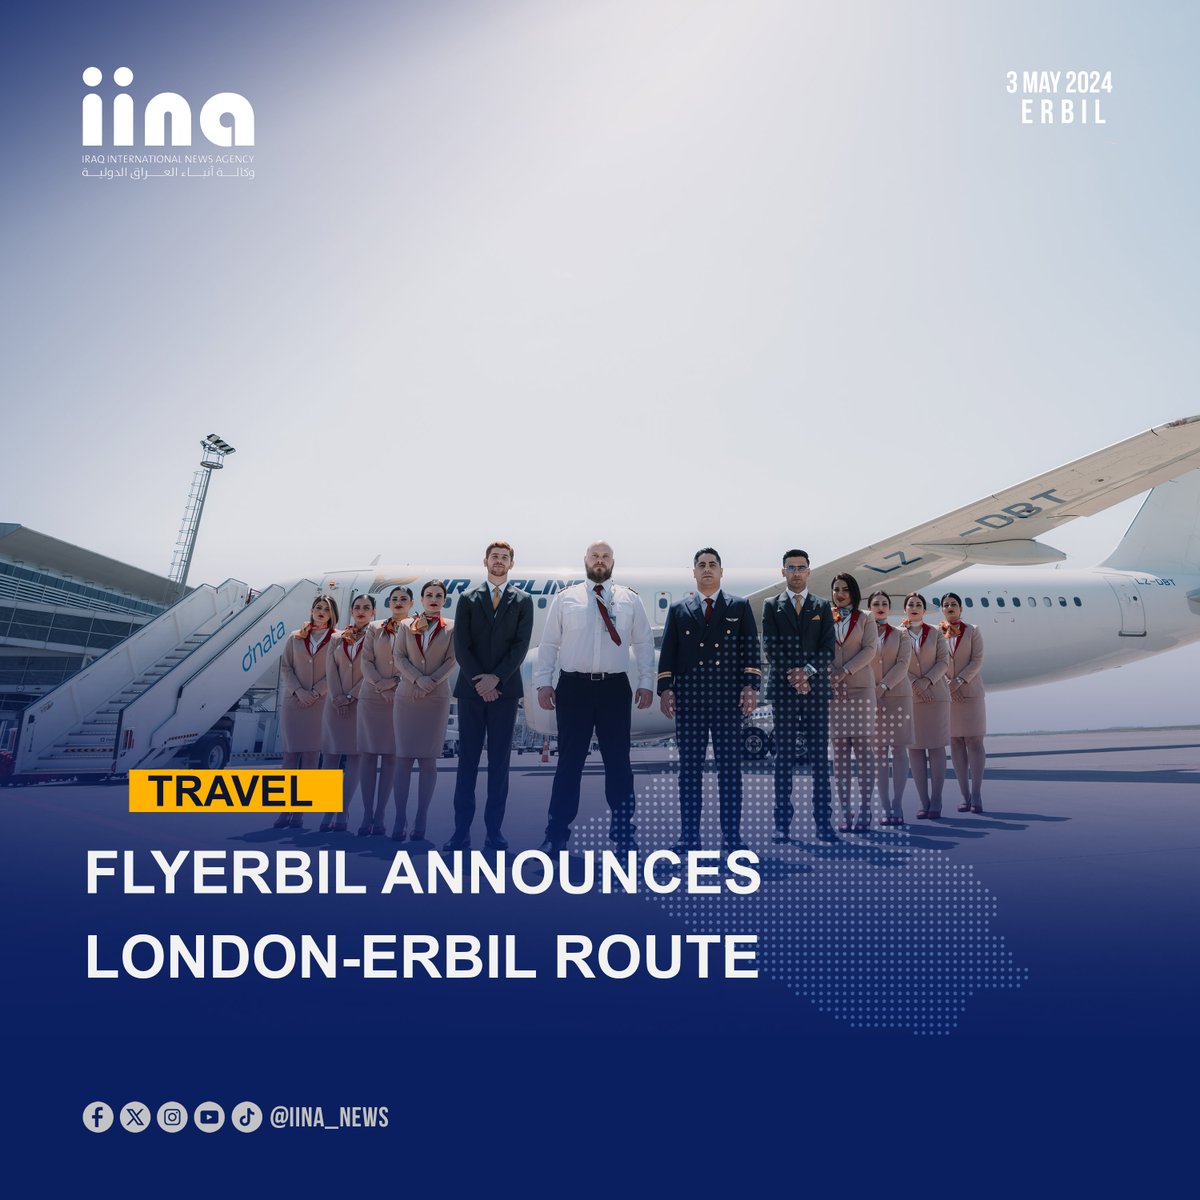 FlyErbil is set to inaugurate its newest route, connecting Erbil, Iraq, to London Gatwick starting May 31, 2024. This service will be facilitated by Airbus A320 aircraft. 

#TravelGoals #ExploreTheWorld #DiscoverMore  #LondonBound #Erbil #ConnectingWorlds #ErbilTravel #aviation